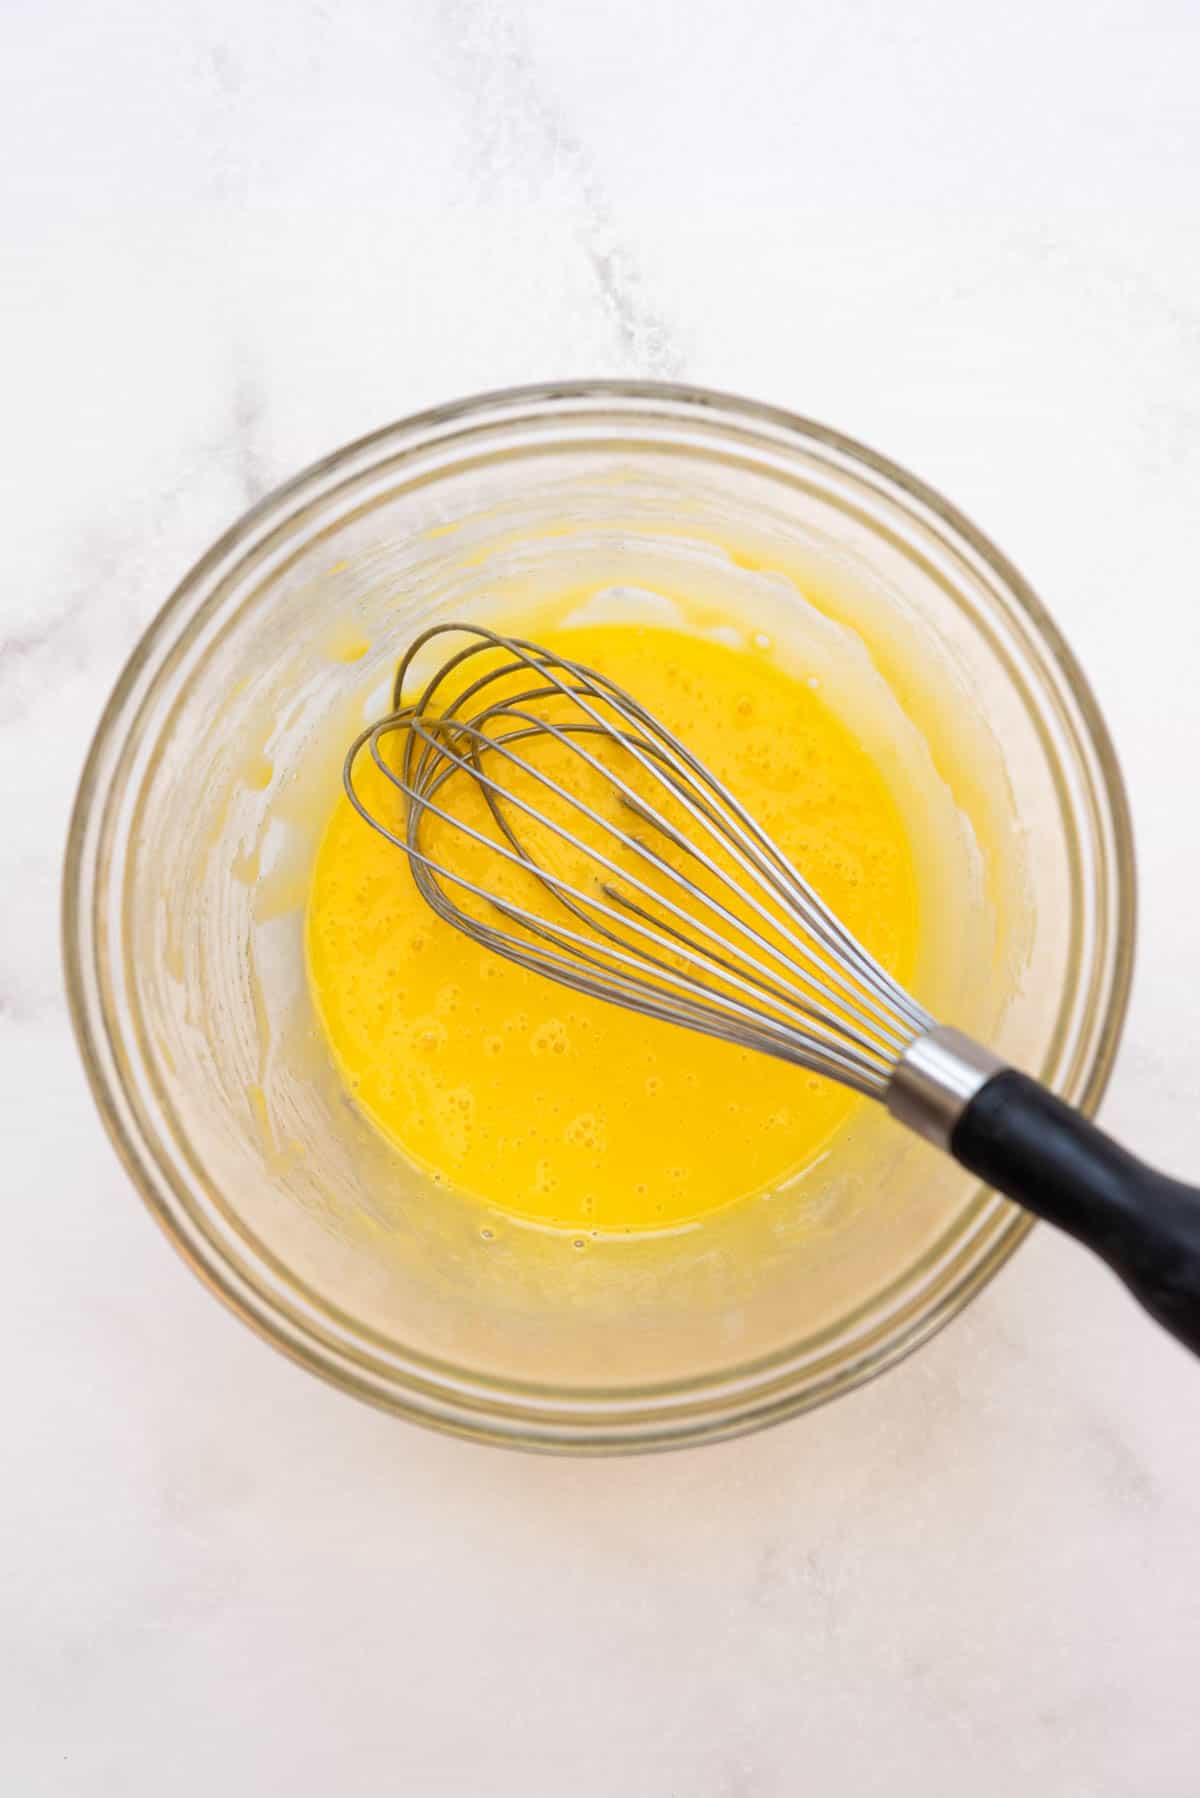 Whisked egg yolks in a bowl with a whisk.